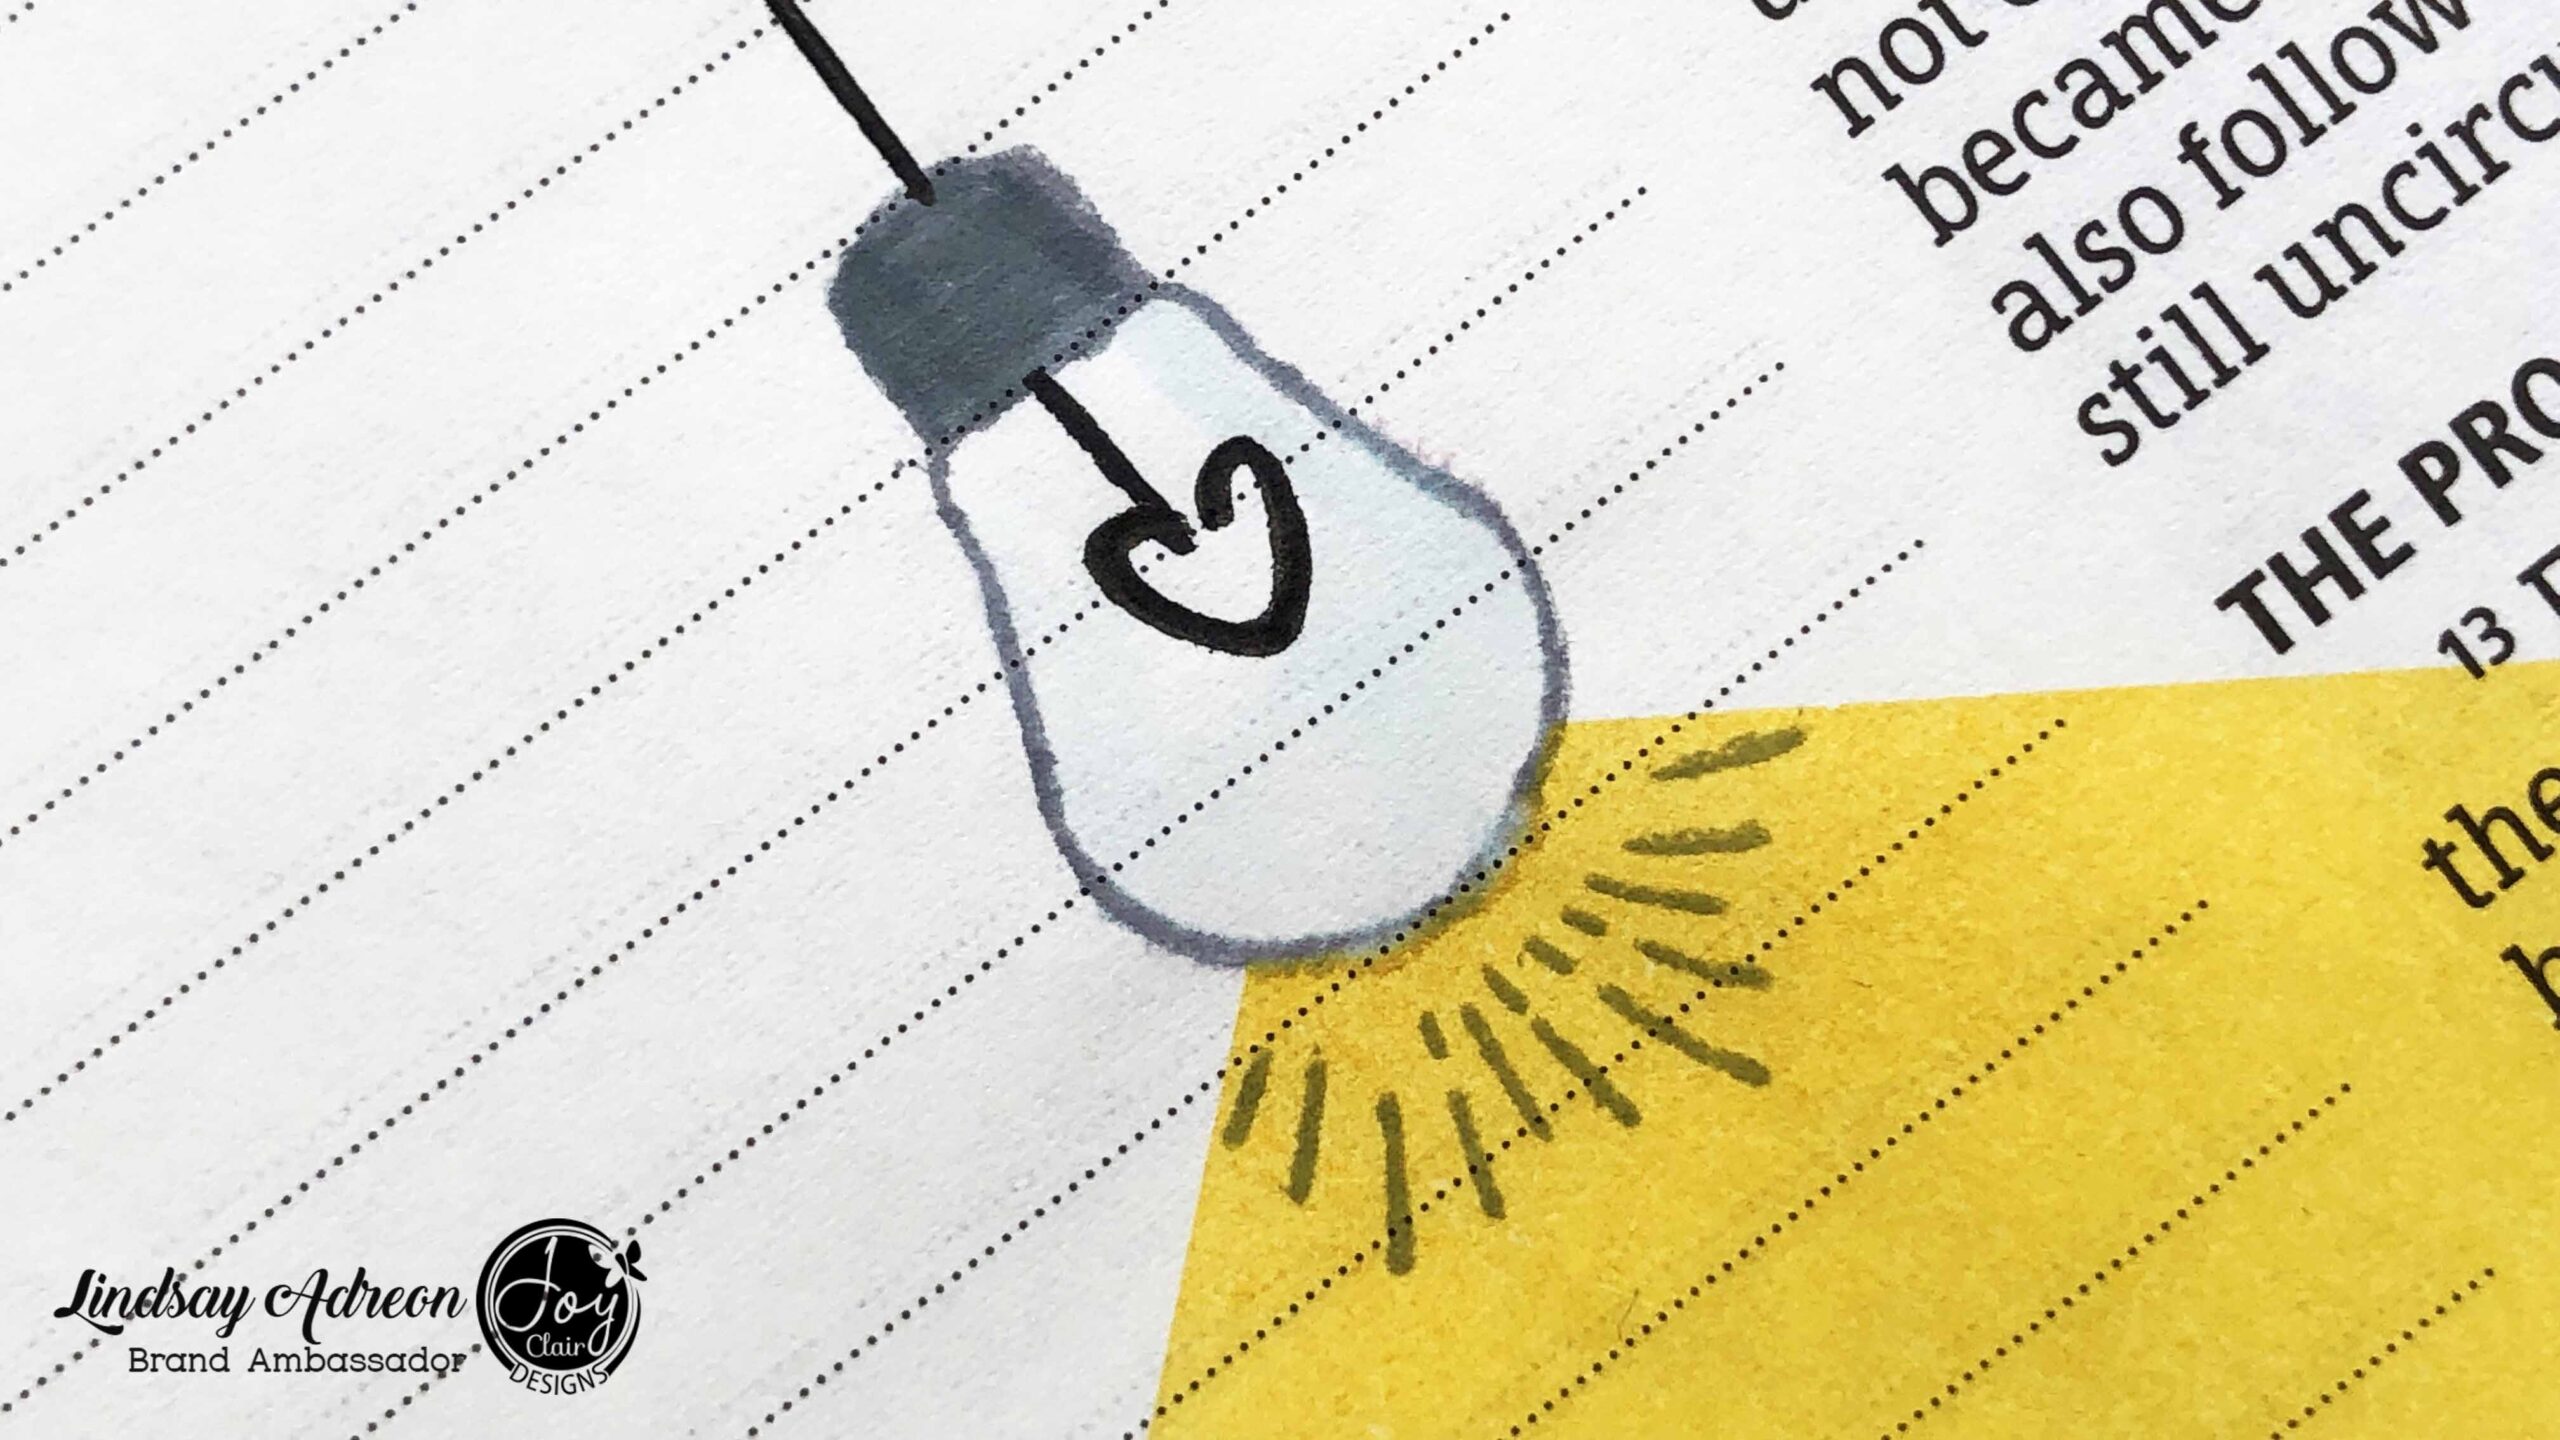 Stamped light bulb with hand drawn center. I love adding simple hand drawn elements to my Bible Journaling!